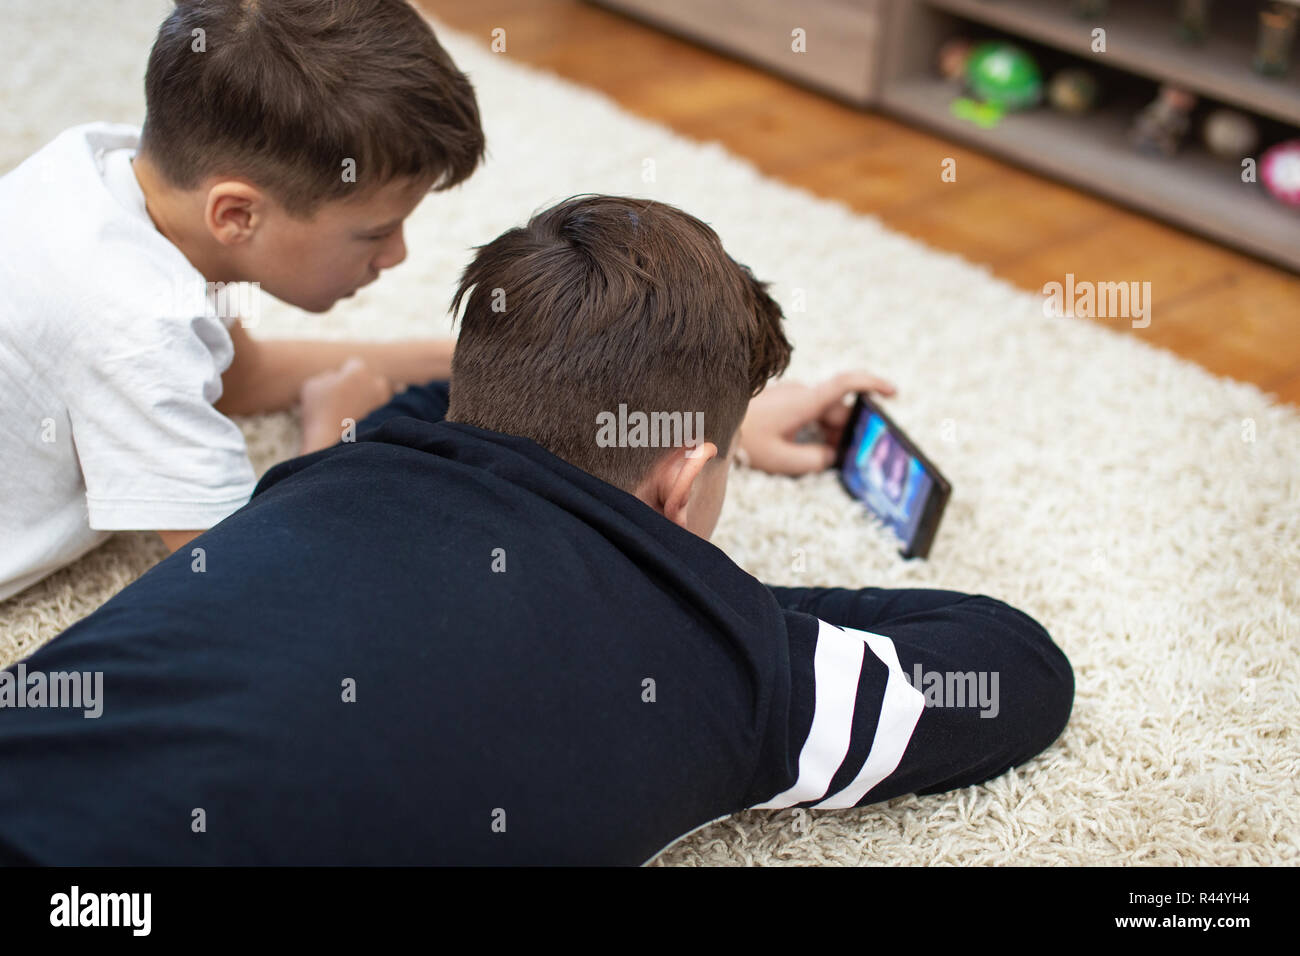 Little boys watching video by smartphone on carpet at home, rear view Stock Photo